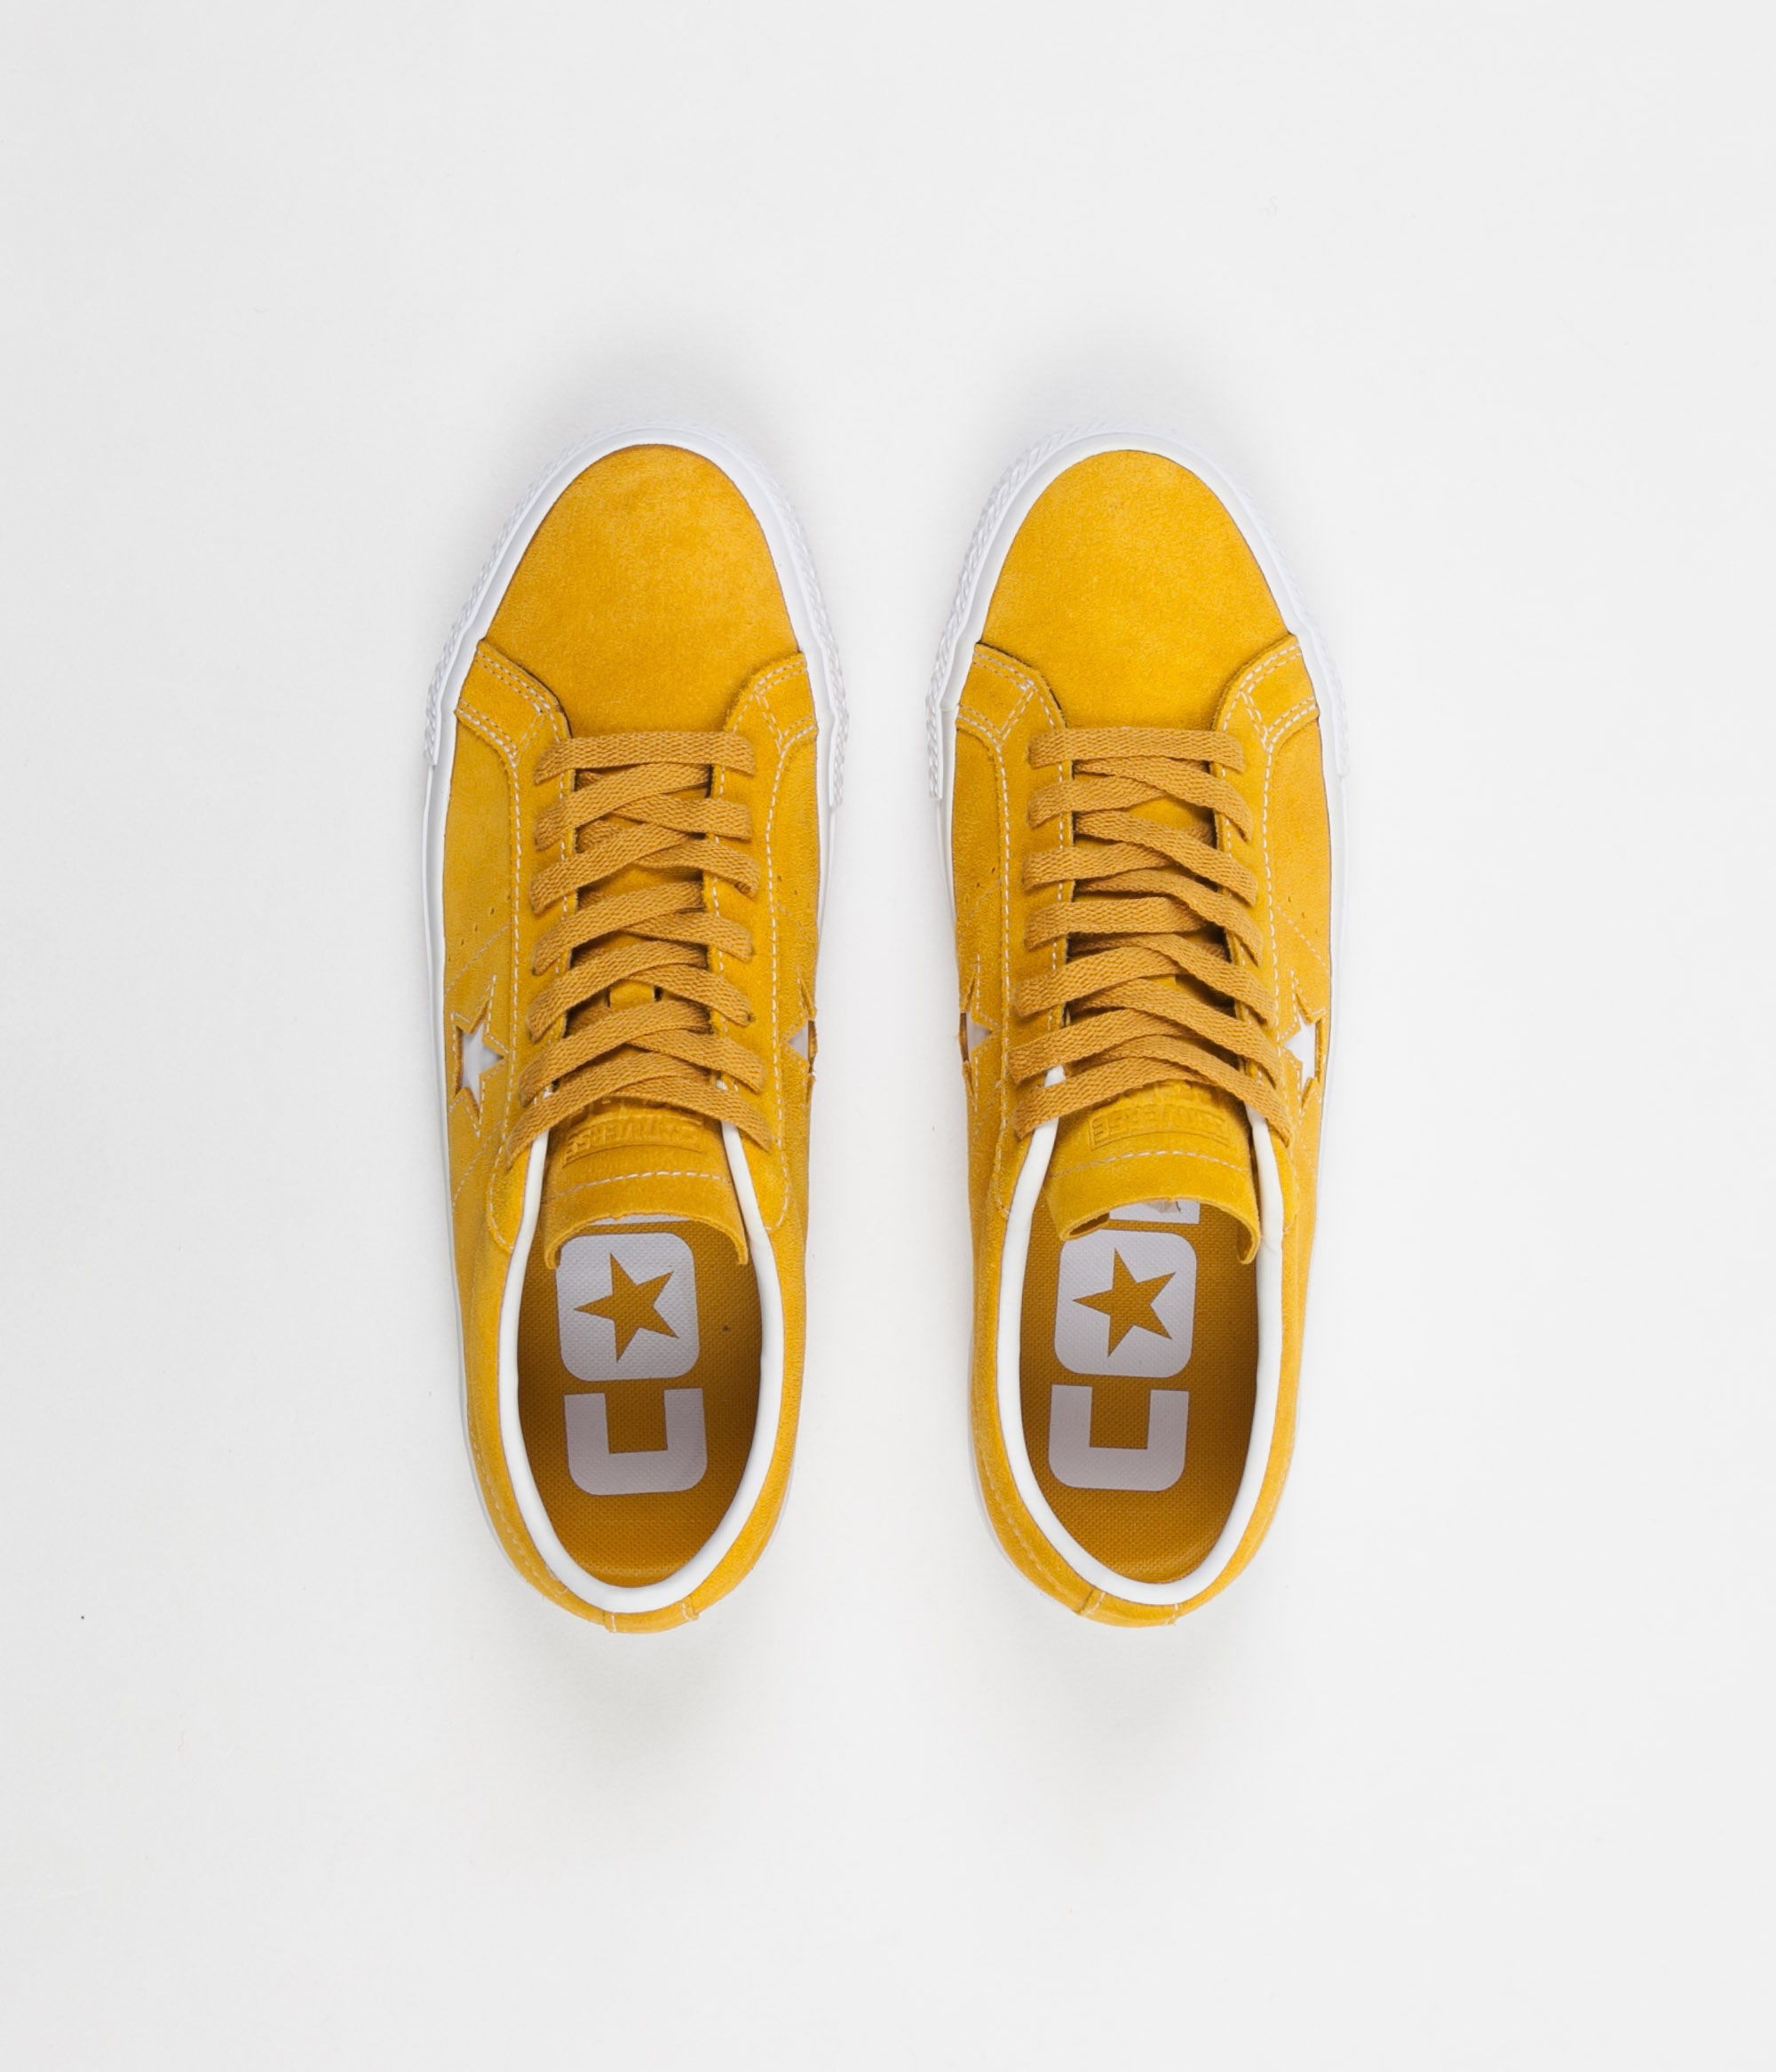 yellow converse one star